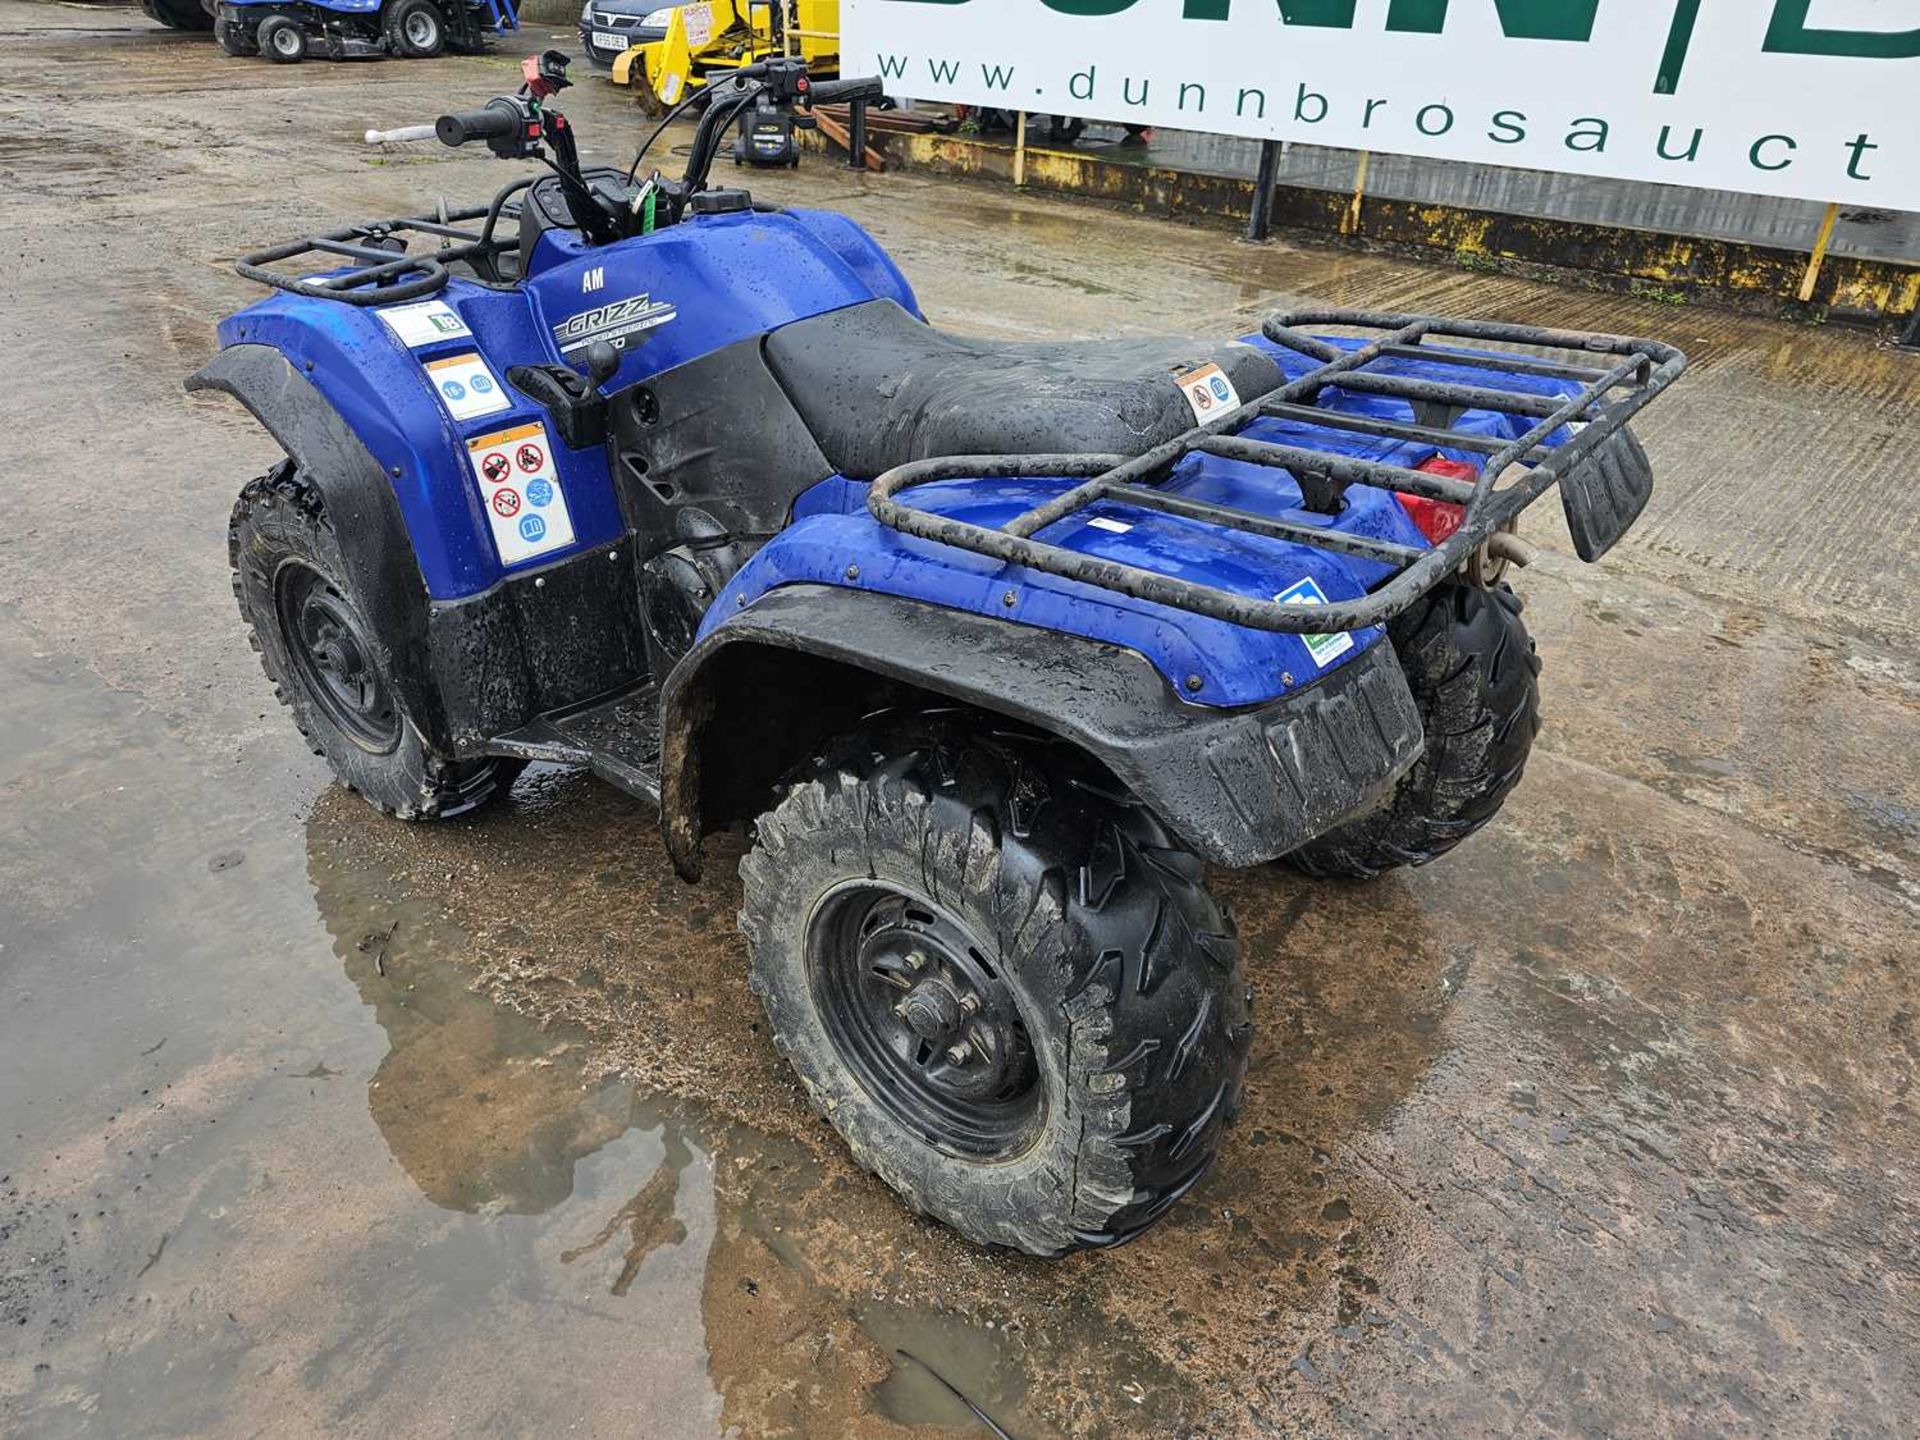 2016 Yamaha Grizzly 450cc 4WD Petrol Quad Bike, Winch, Power Steering - Image 3 of 19